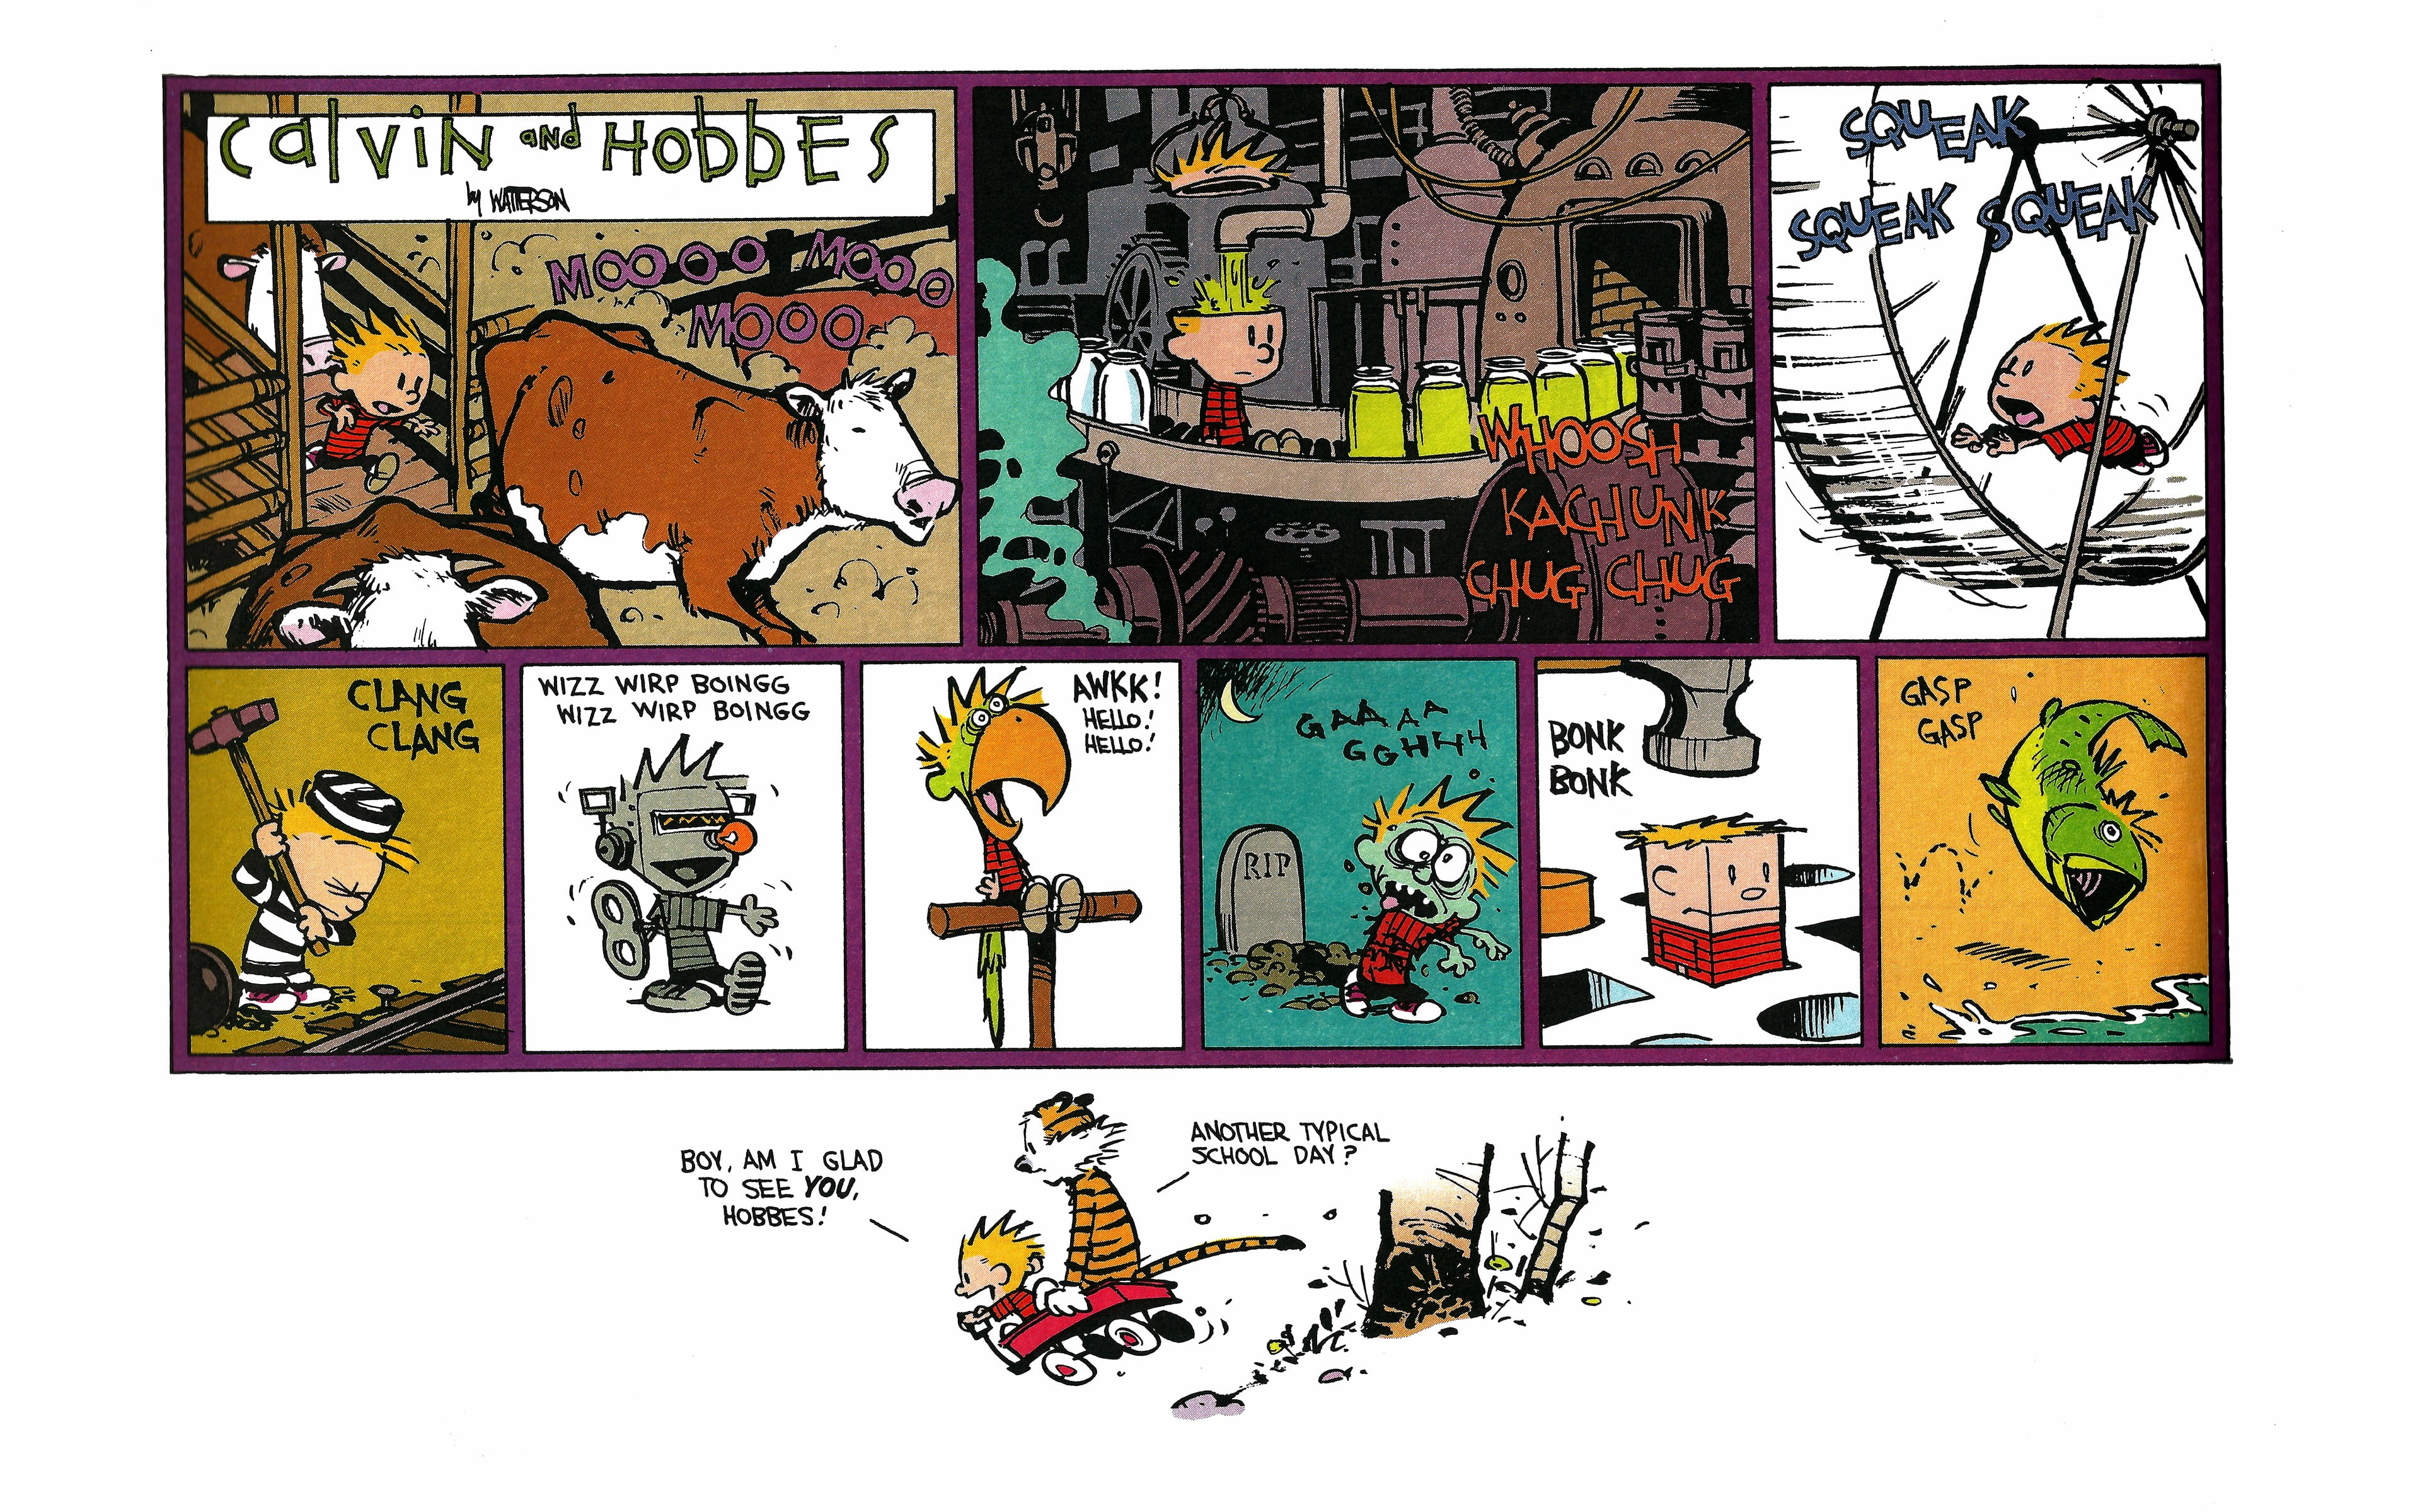 Calvin and Hobbes comic strip, Calvin and Hobbes, comics, simple background